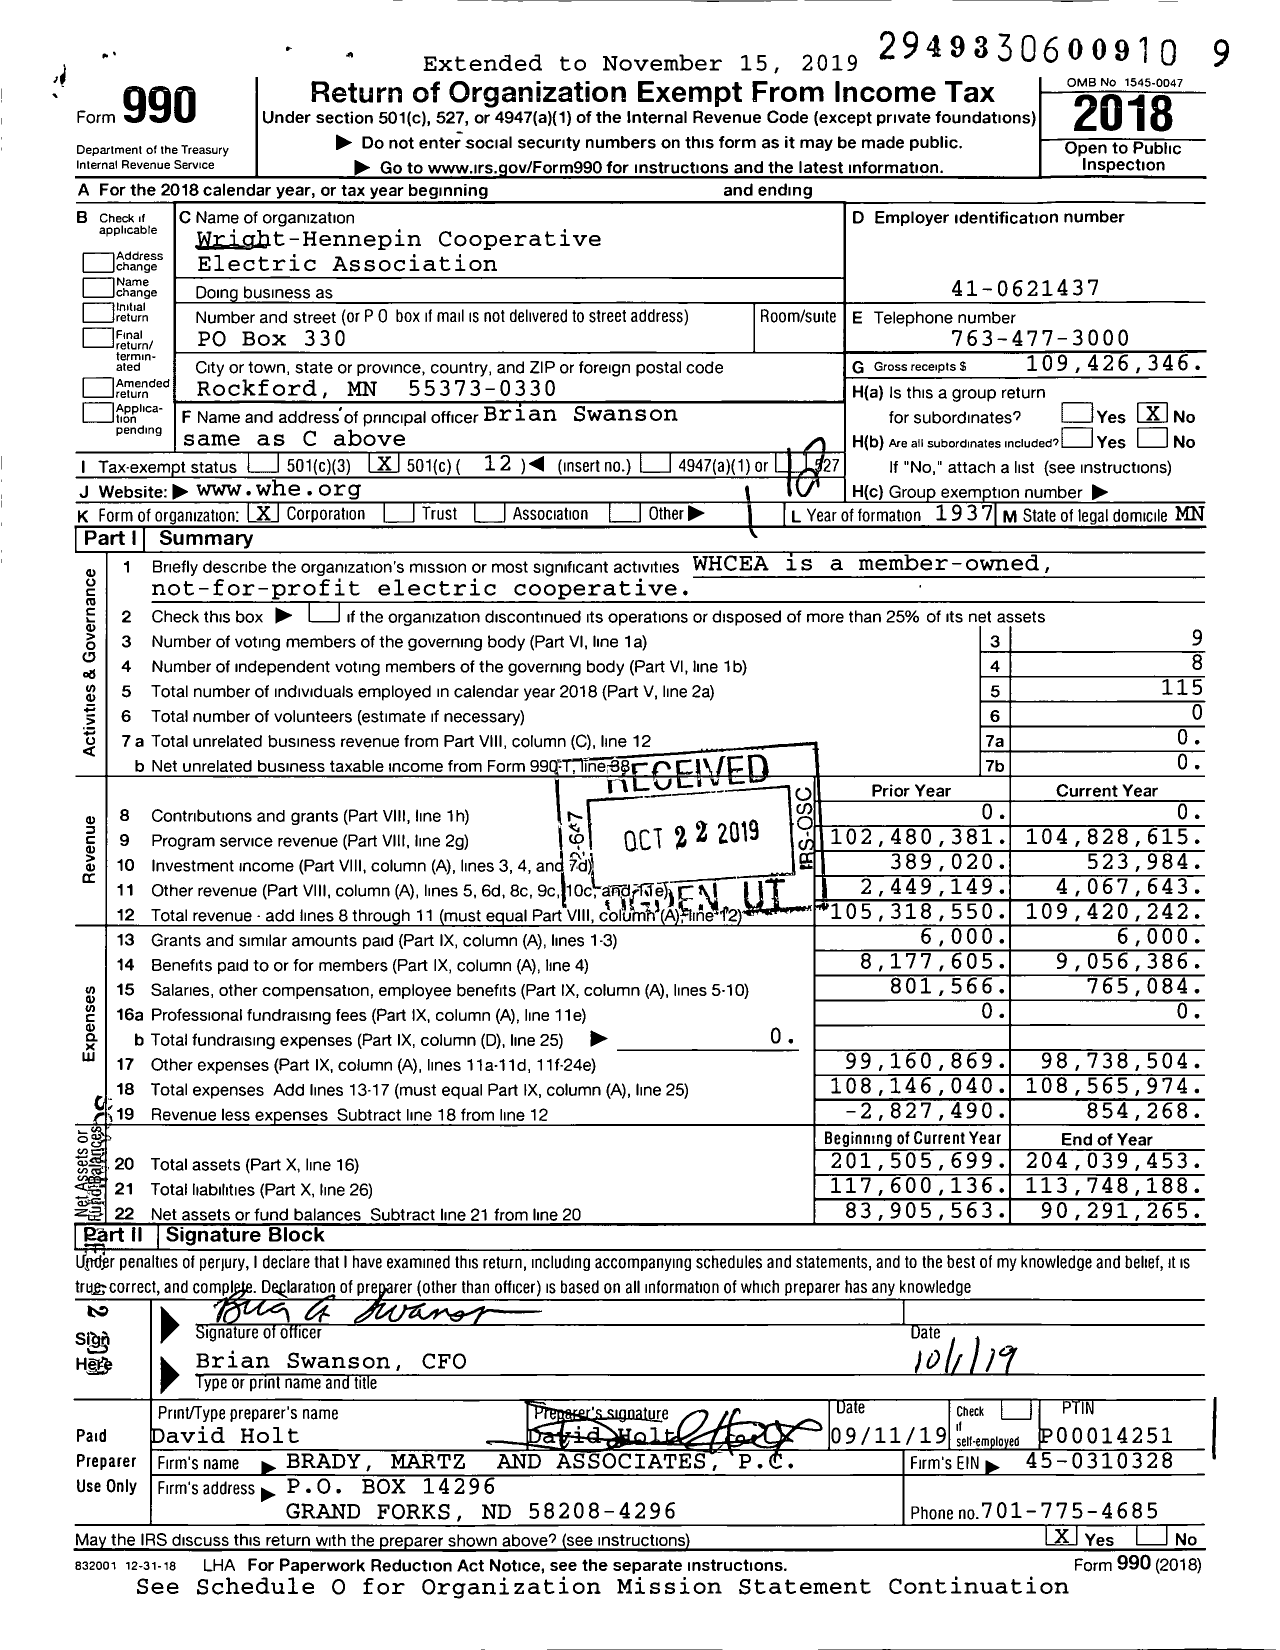 Image of first page of 2018 Form 990O for Wright-Hennepin Cooperative Electric Association